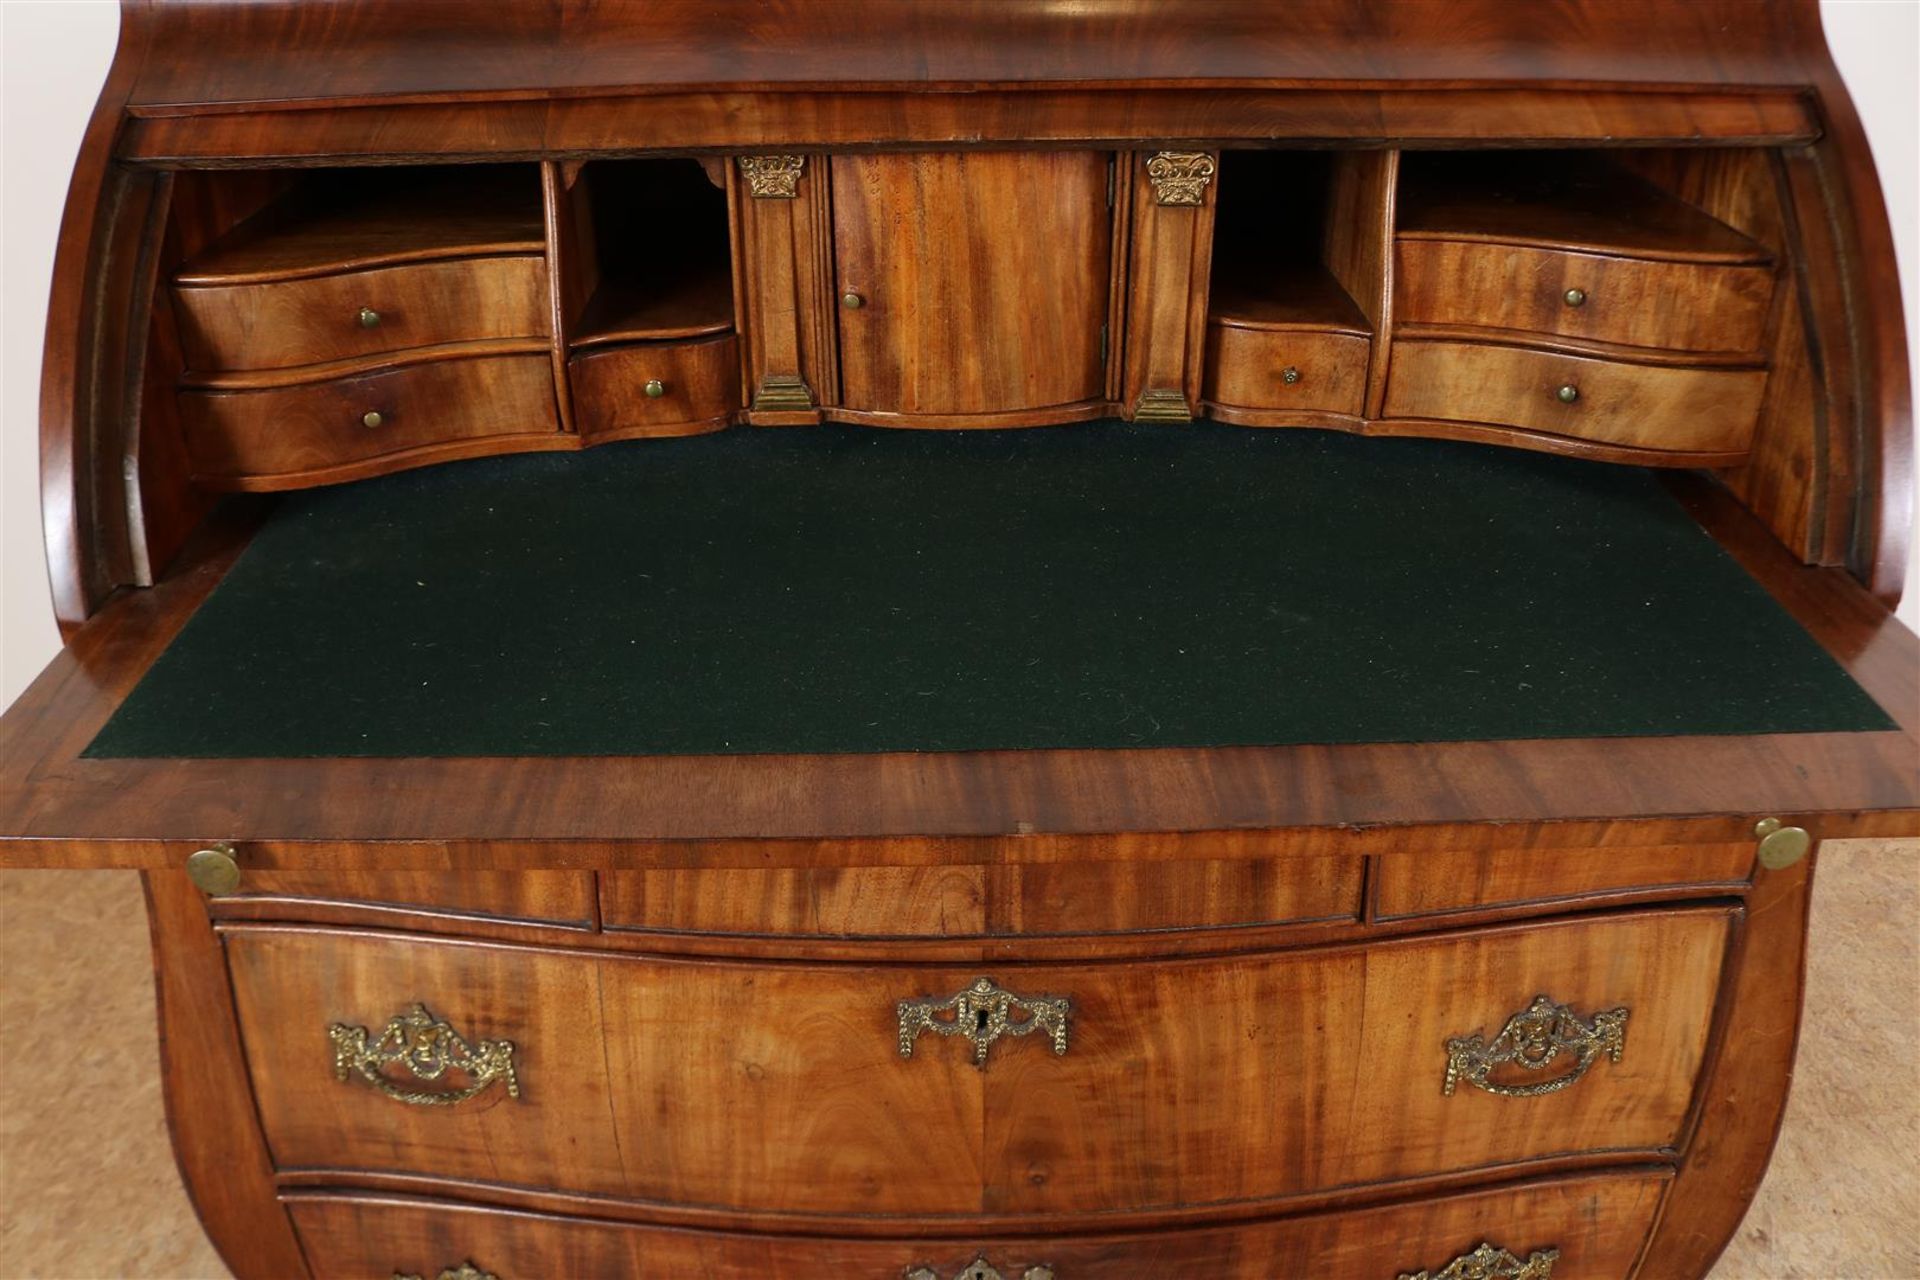 Mahogany Louis XVI, curved cylinder desk, with extendable writing surface, interior with 6 drawers - Image 4 of 6